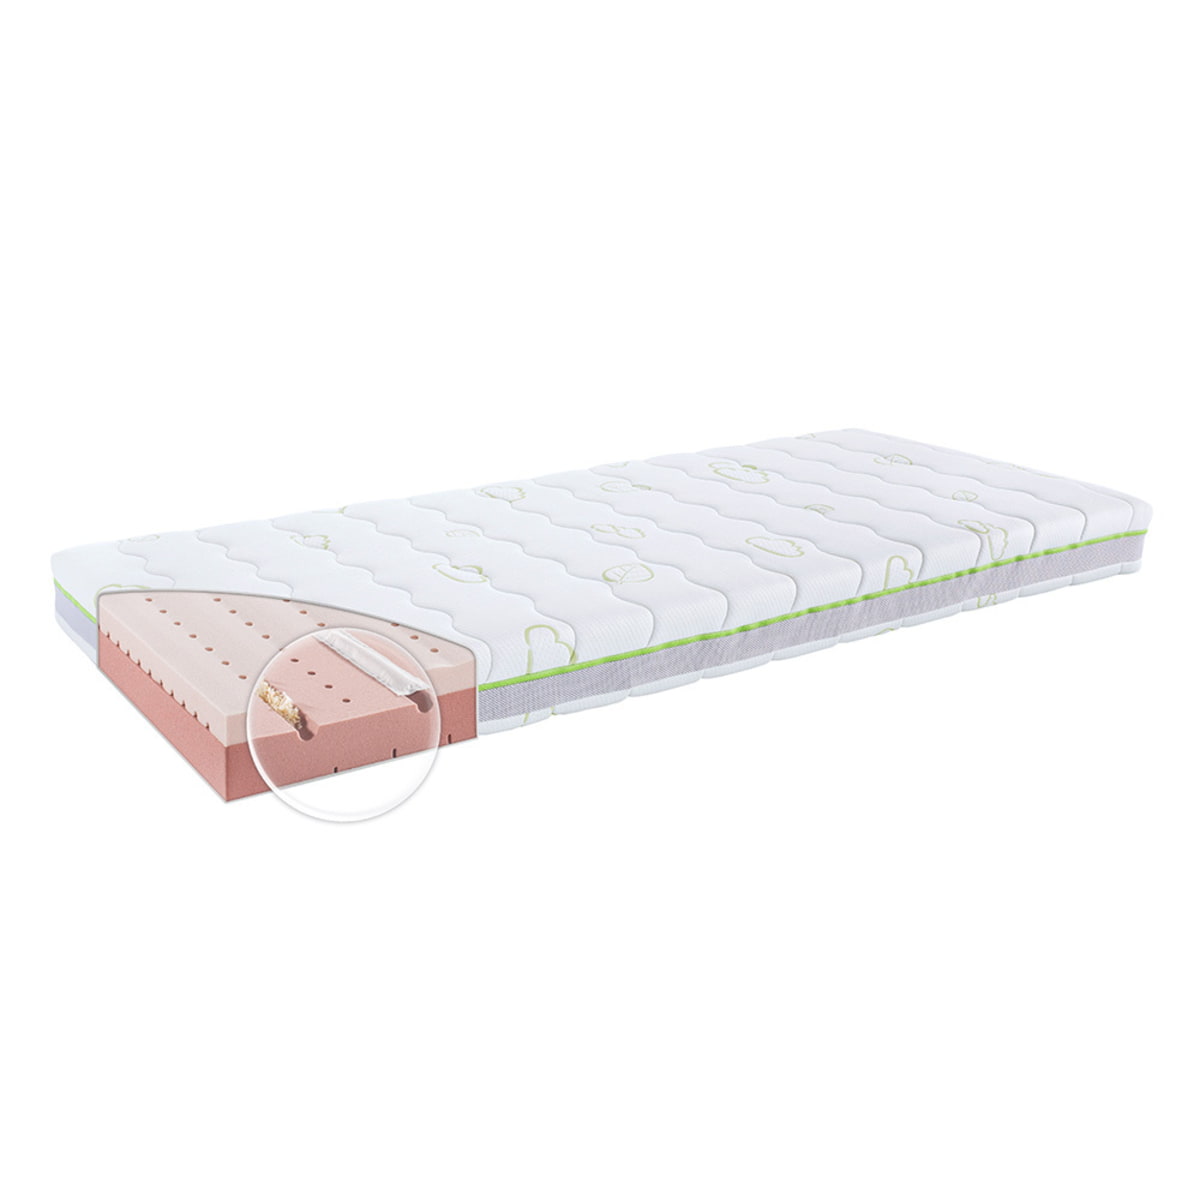 Youth Mattress Green Air with swiss stone pine chippings and emc® verde foam